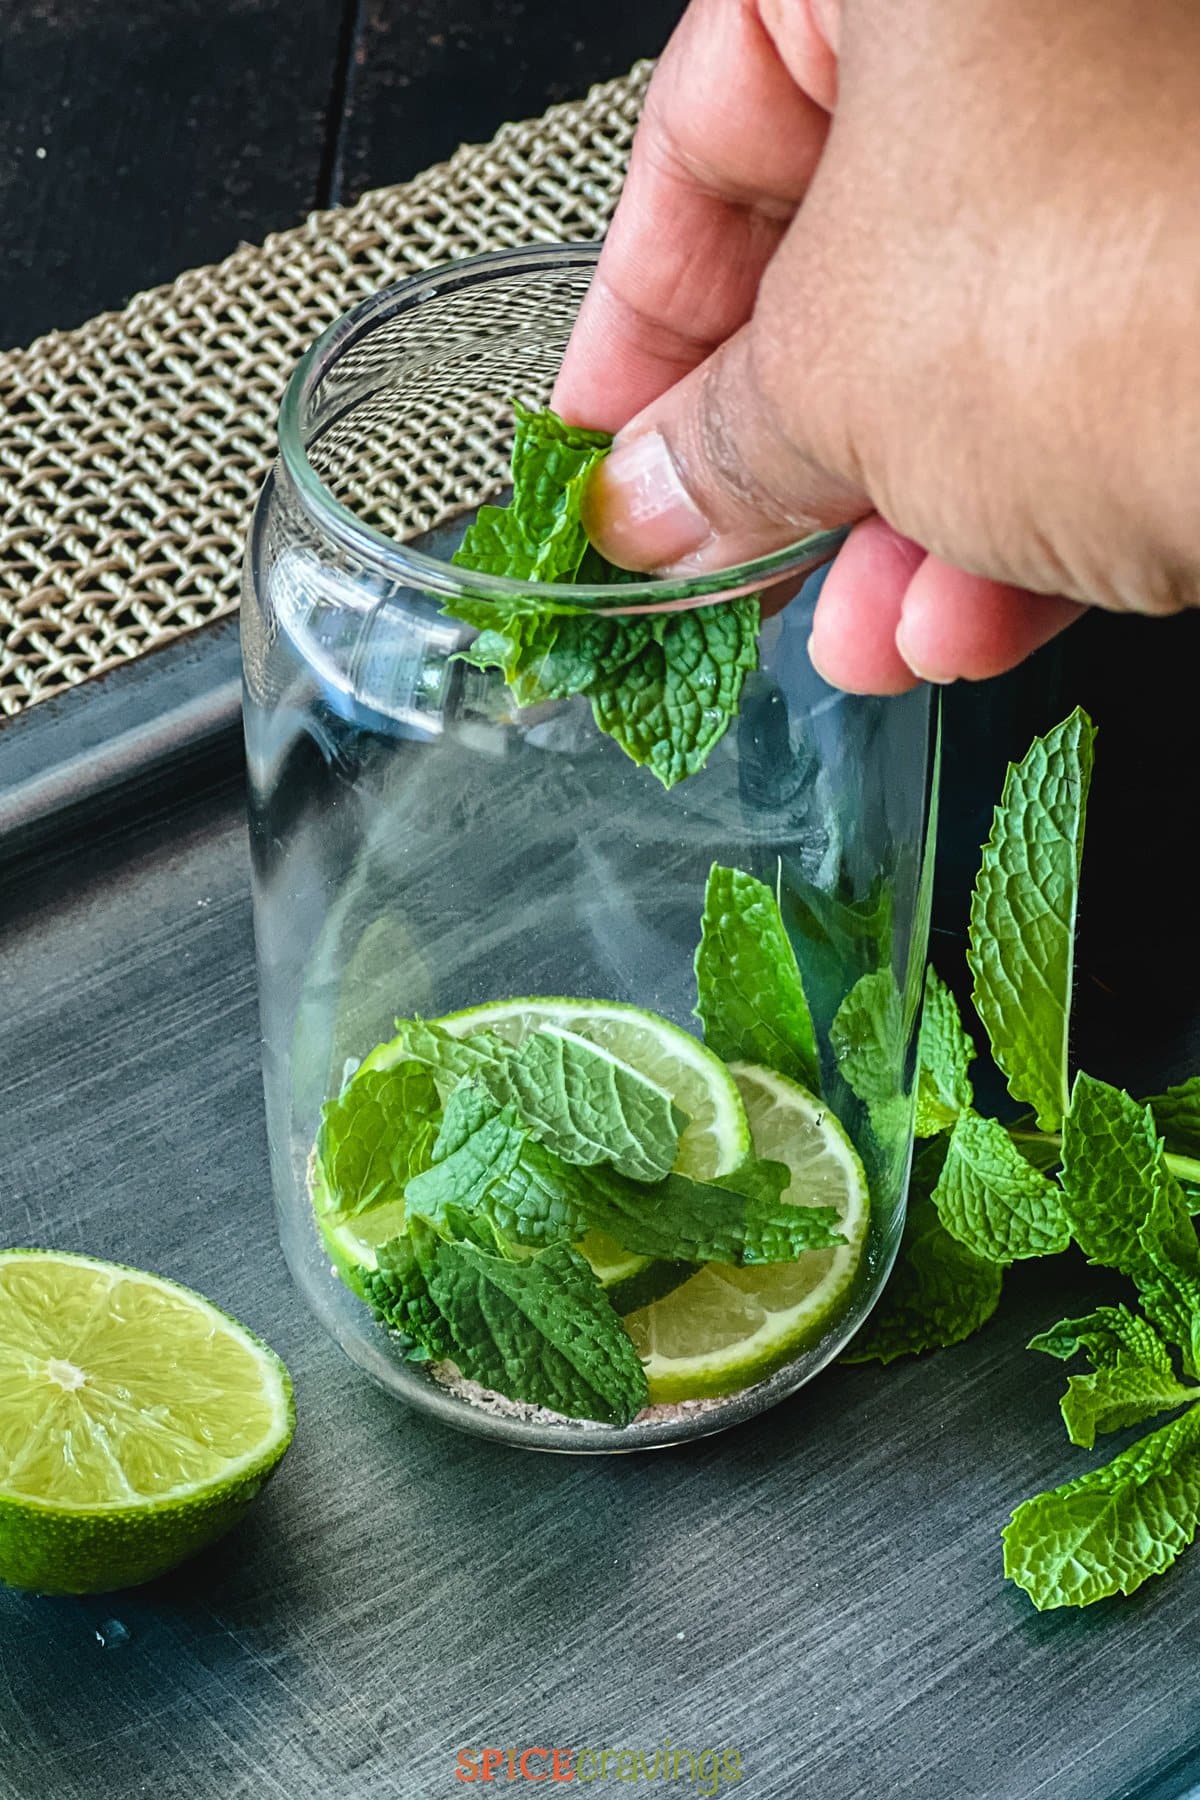 Hand adding mint leaves to glass with lime slices and spices